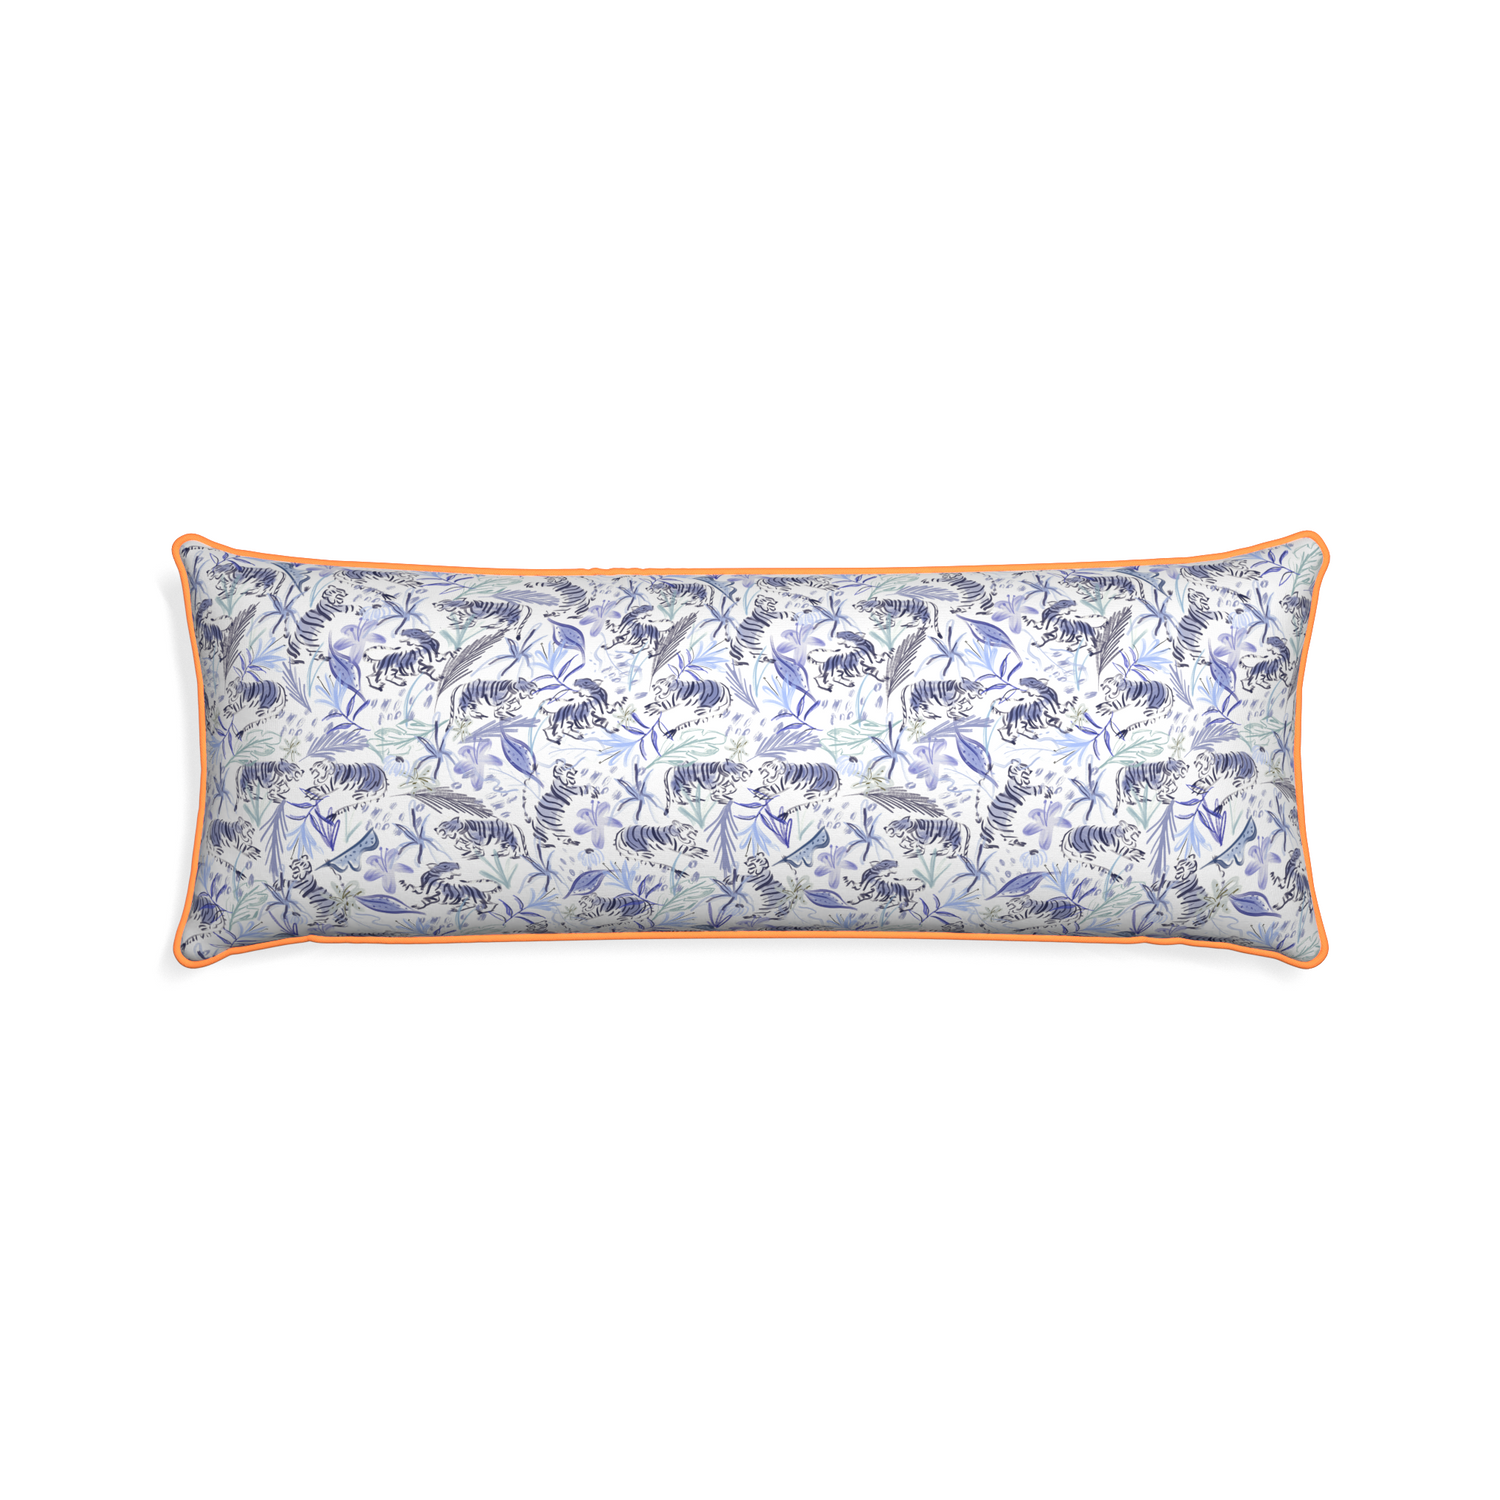 Xl-lumbar frida blue custom blue with intricate tiger designpillow with clementine piping on white background